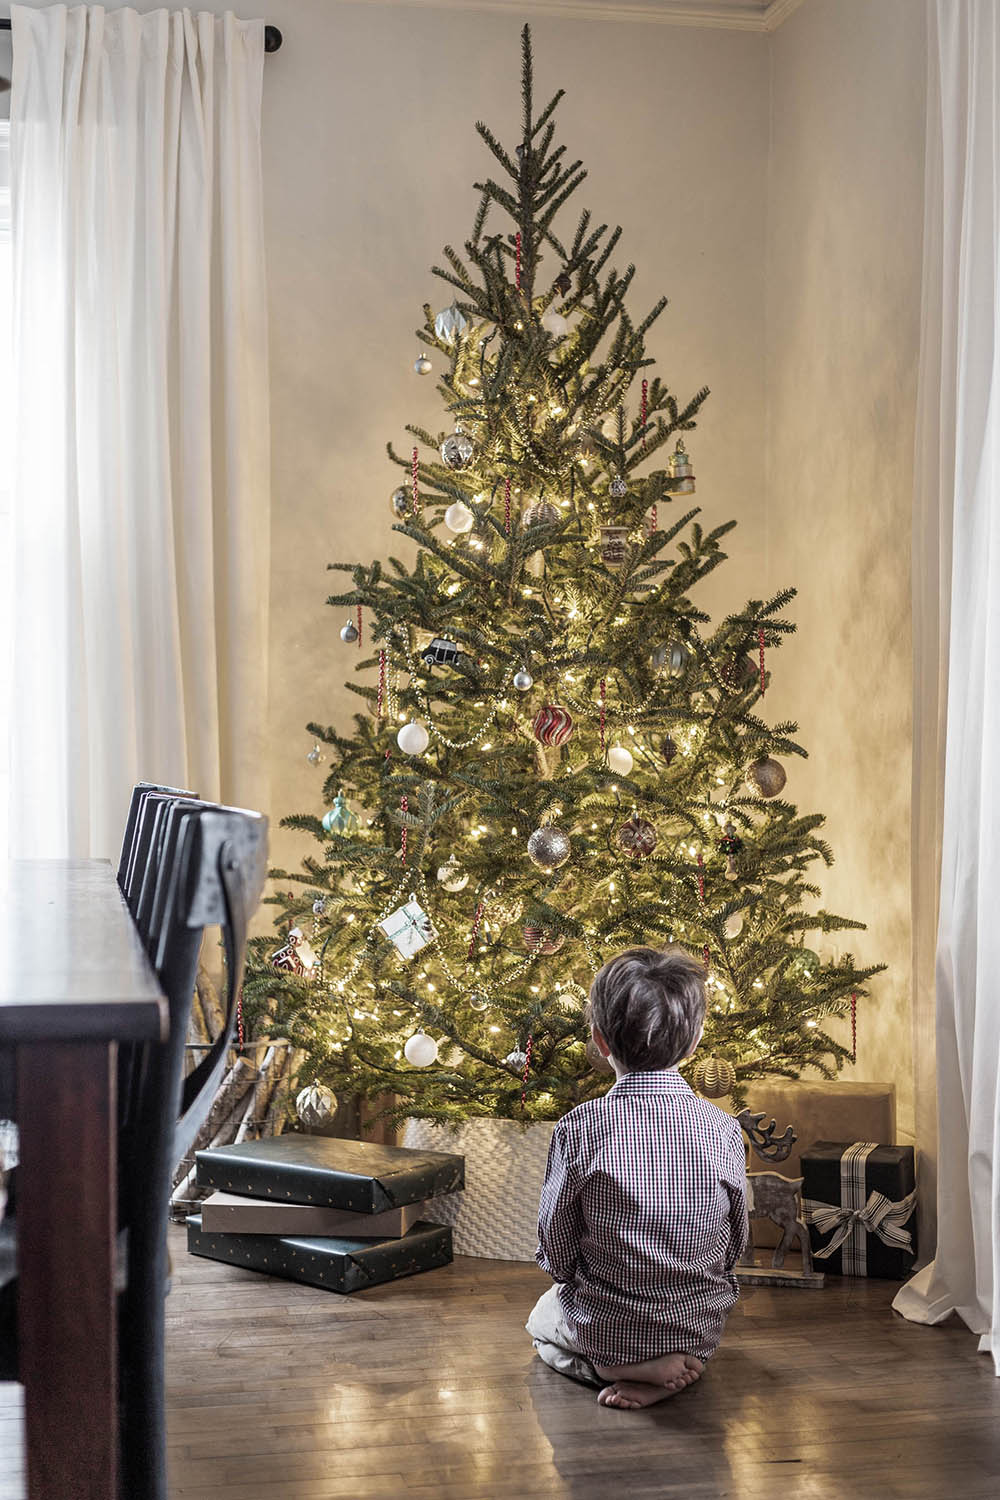 A child with his back turned starting at a lighted Christmas tree.